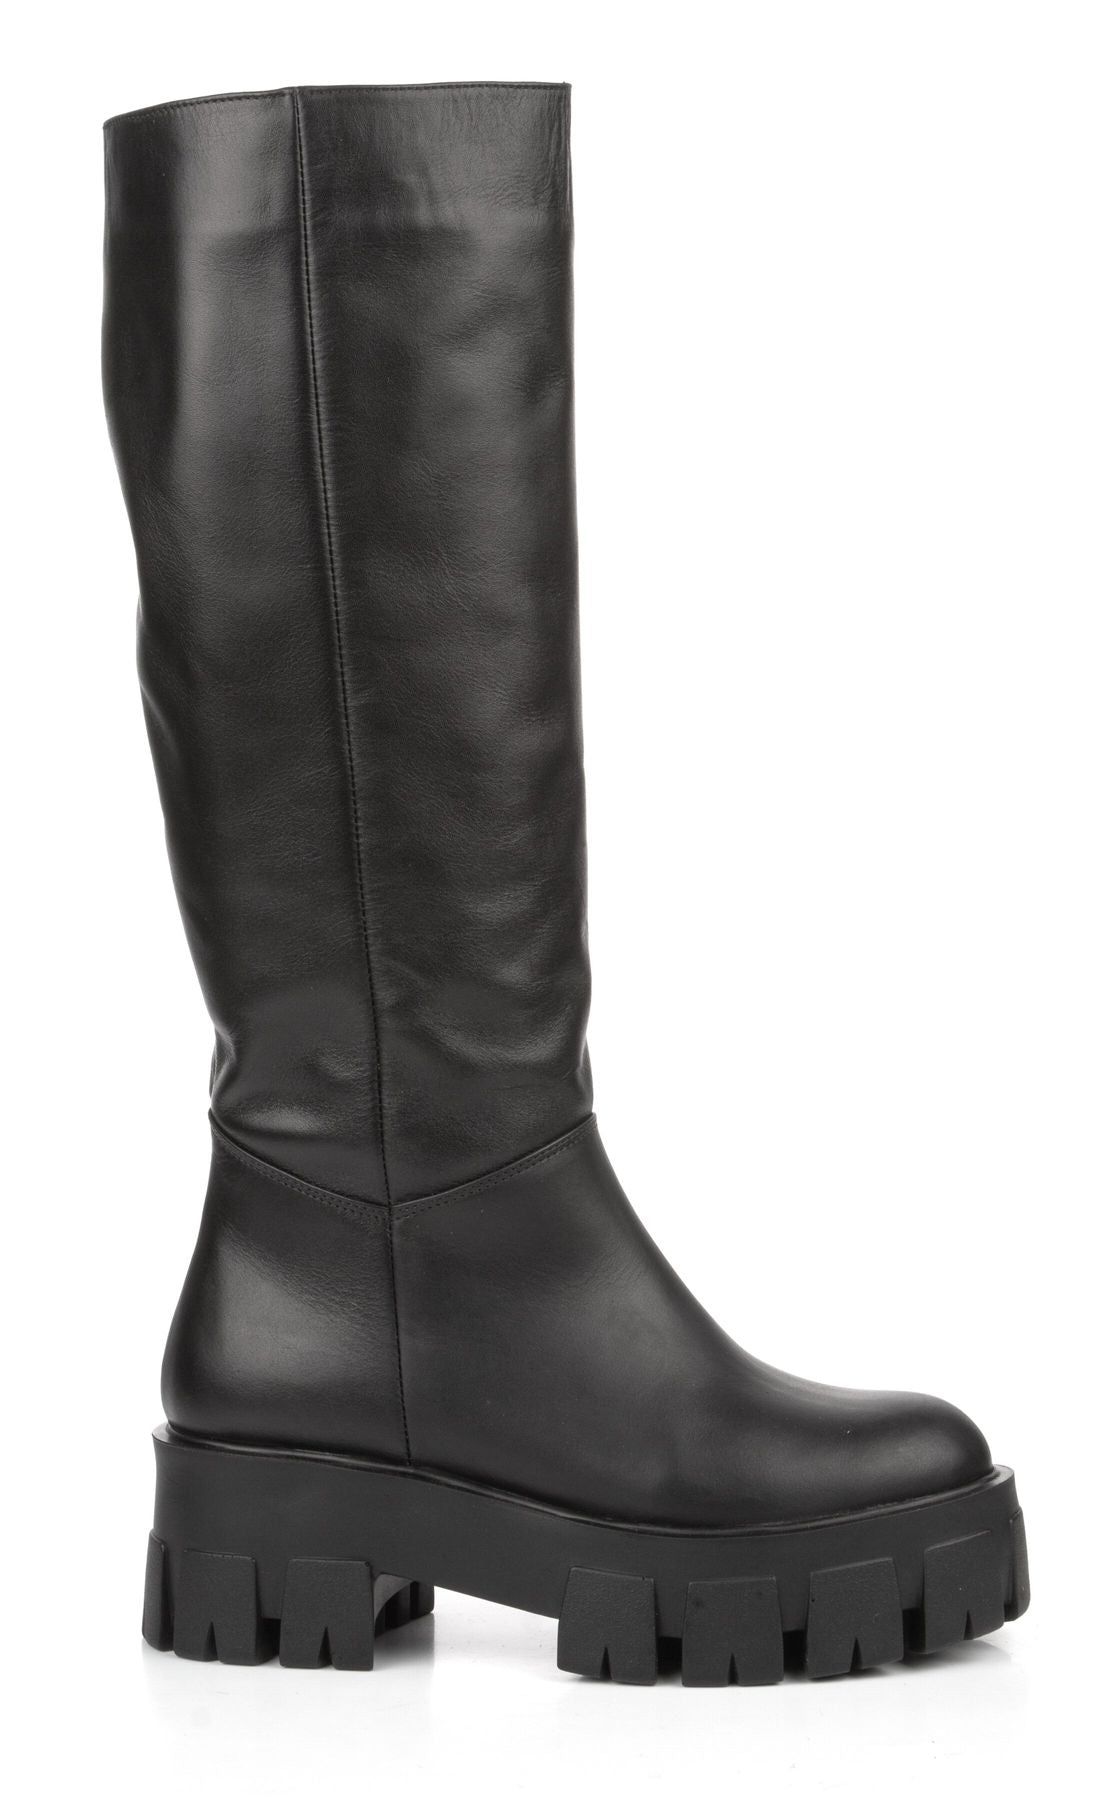 Leather Thing High Boots Chunky Black Platform